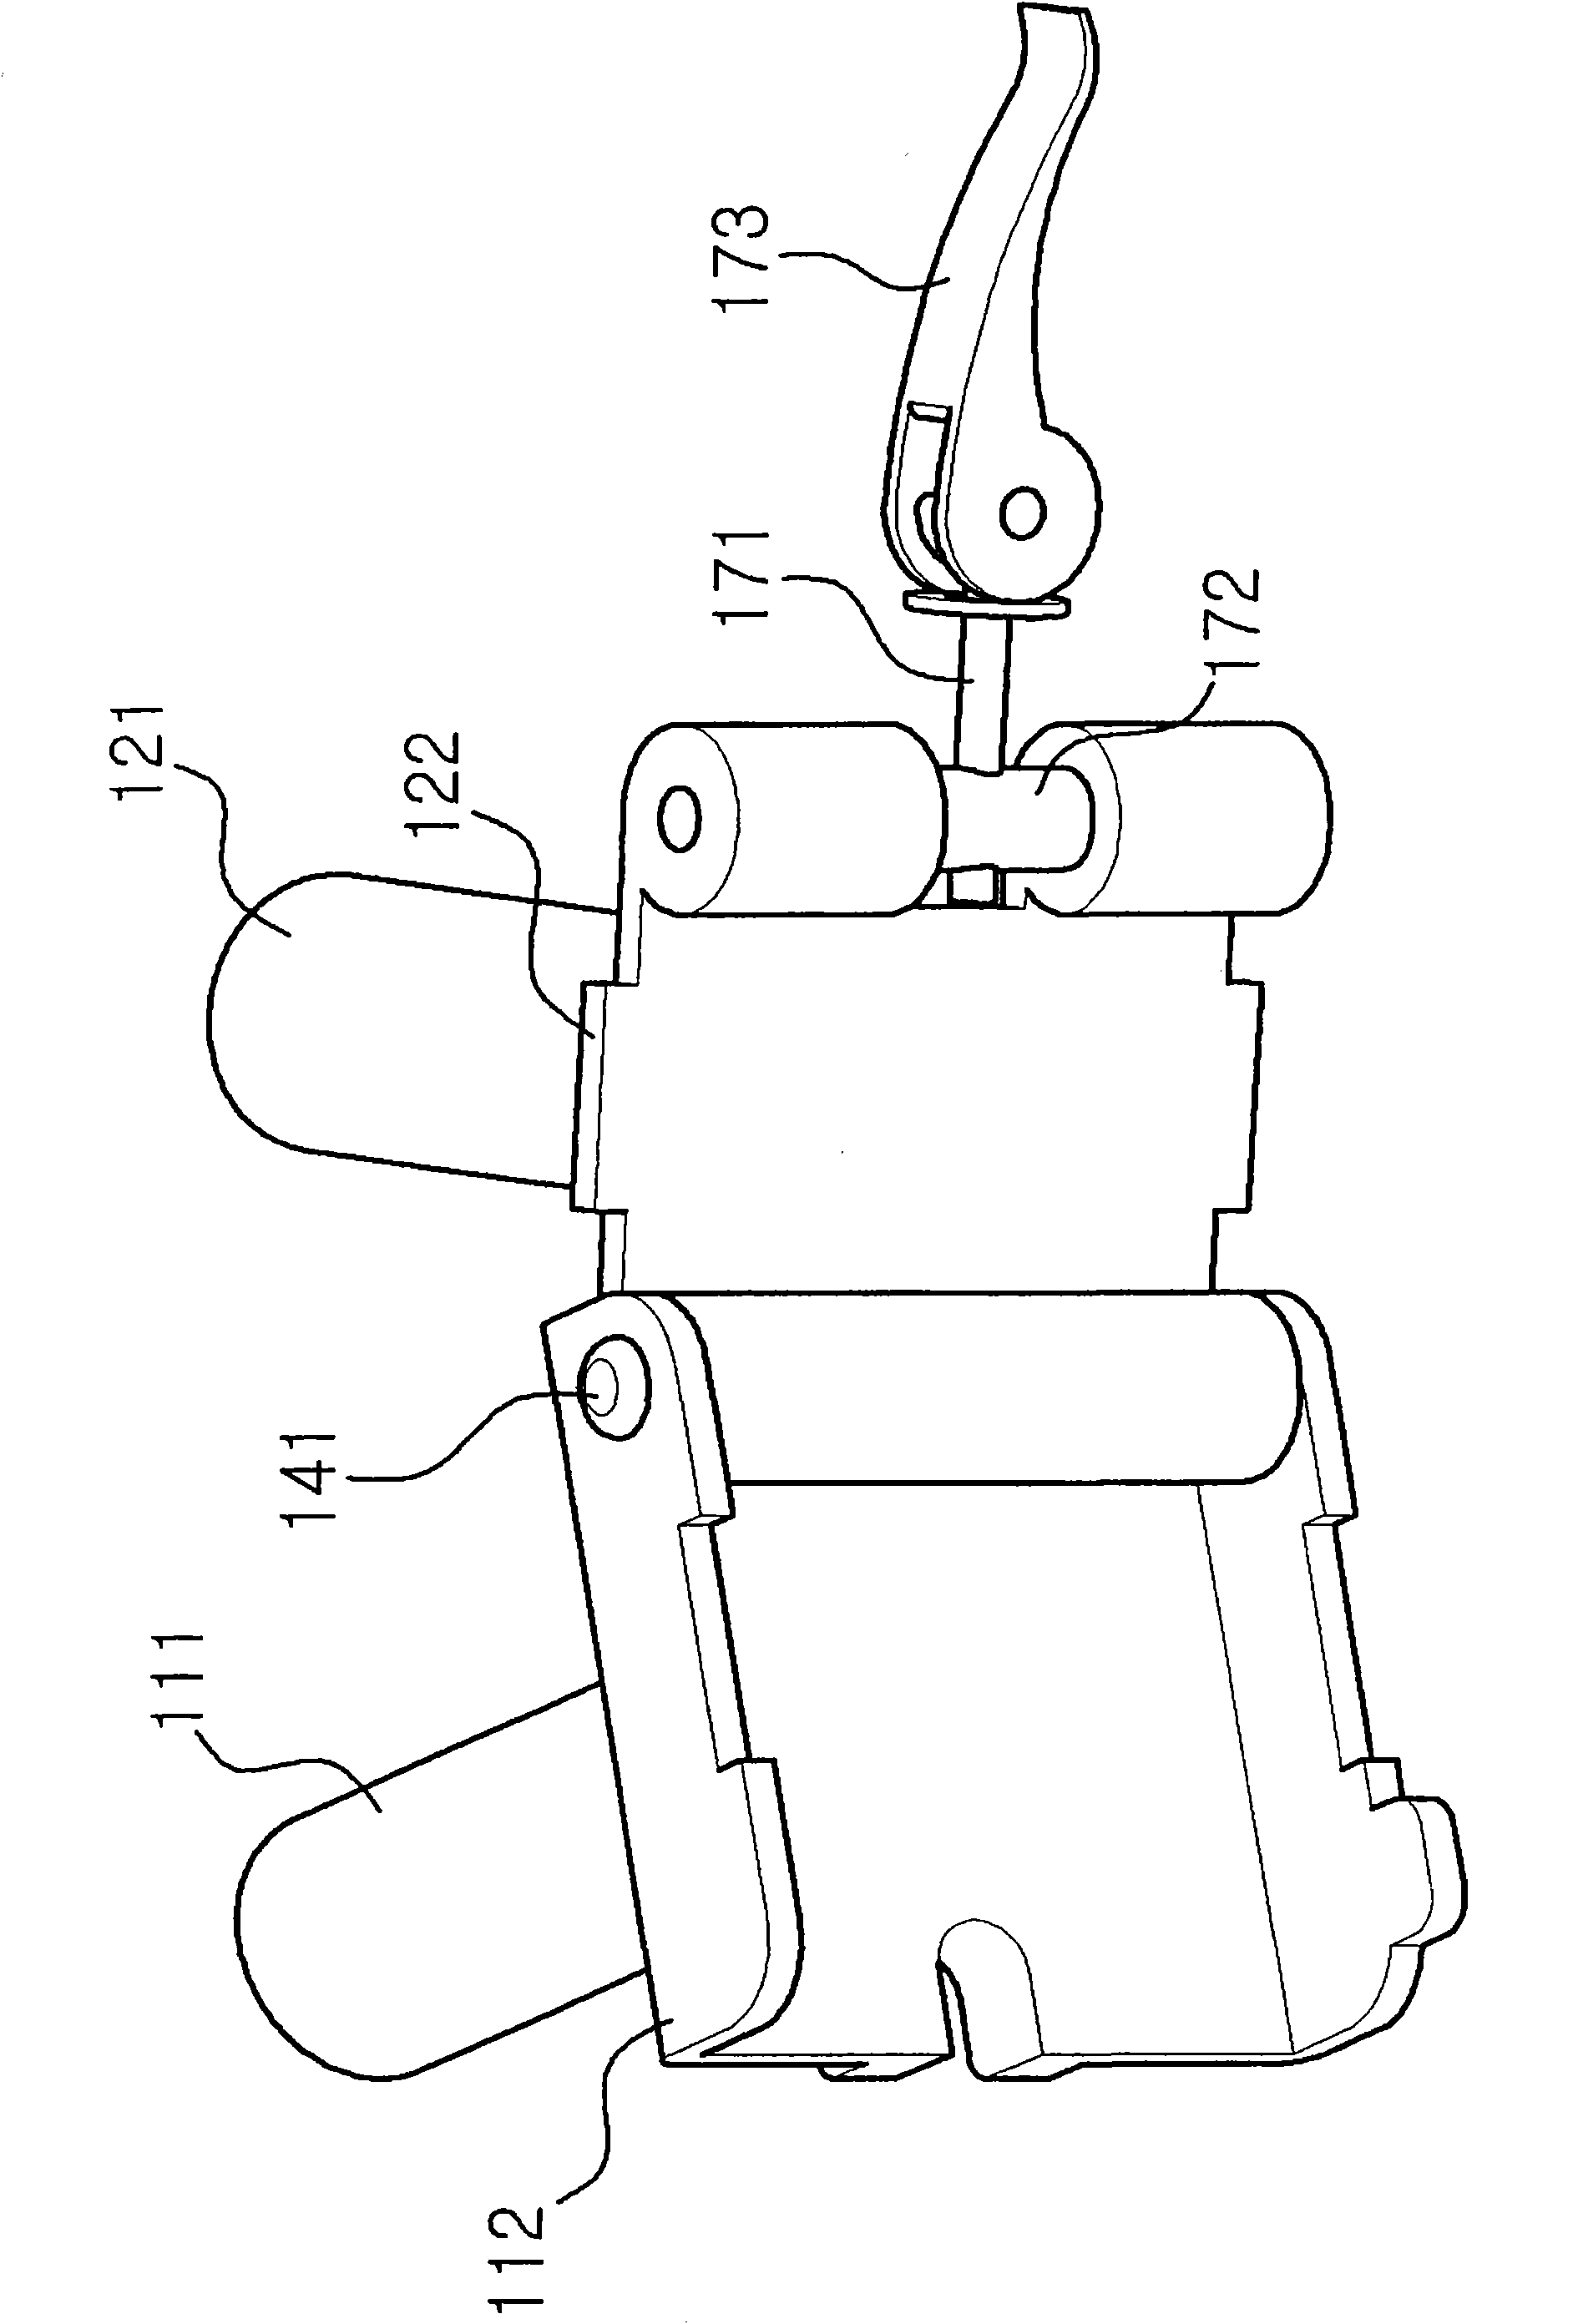 Bicycle folding device having a two-pivot hinge structure